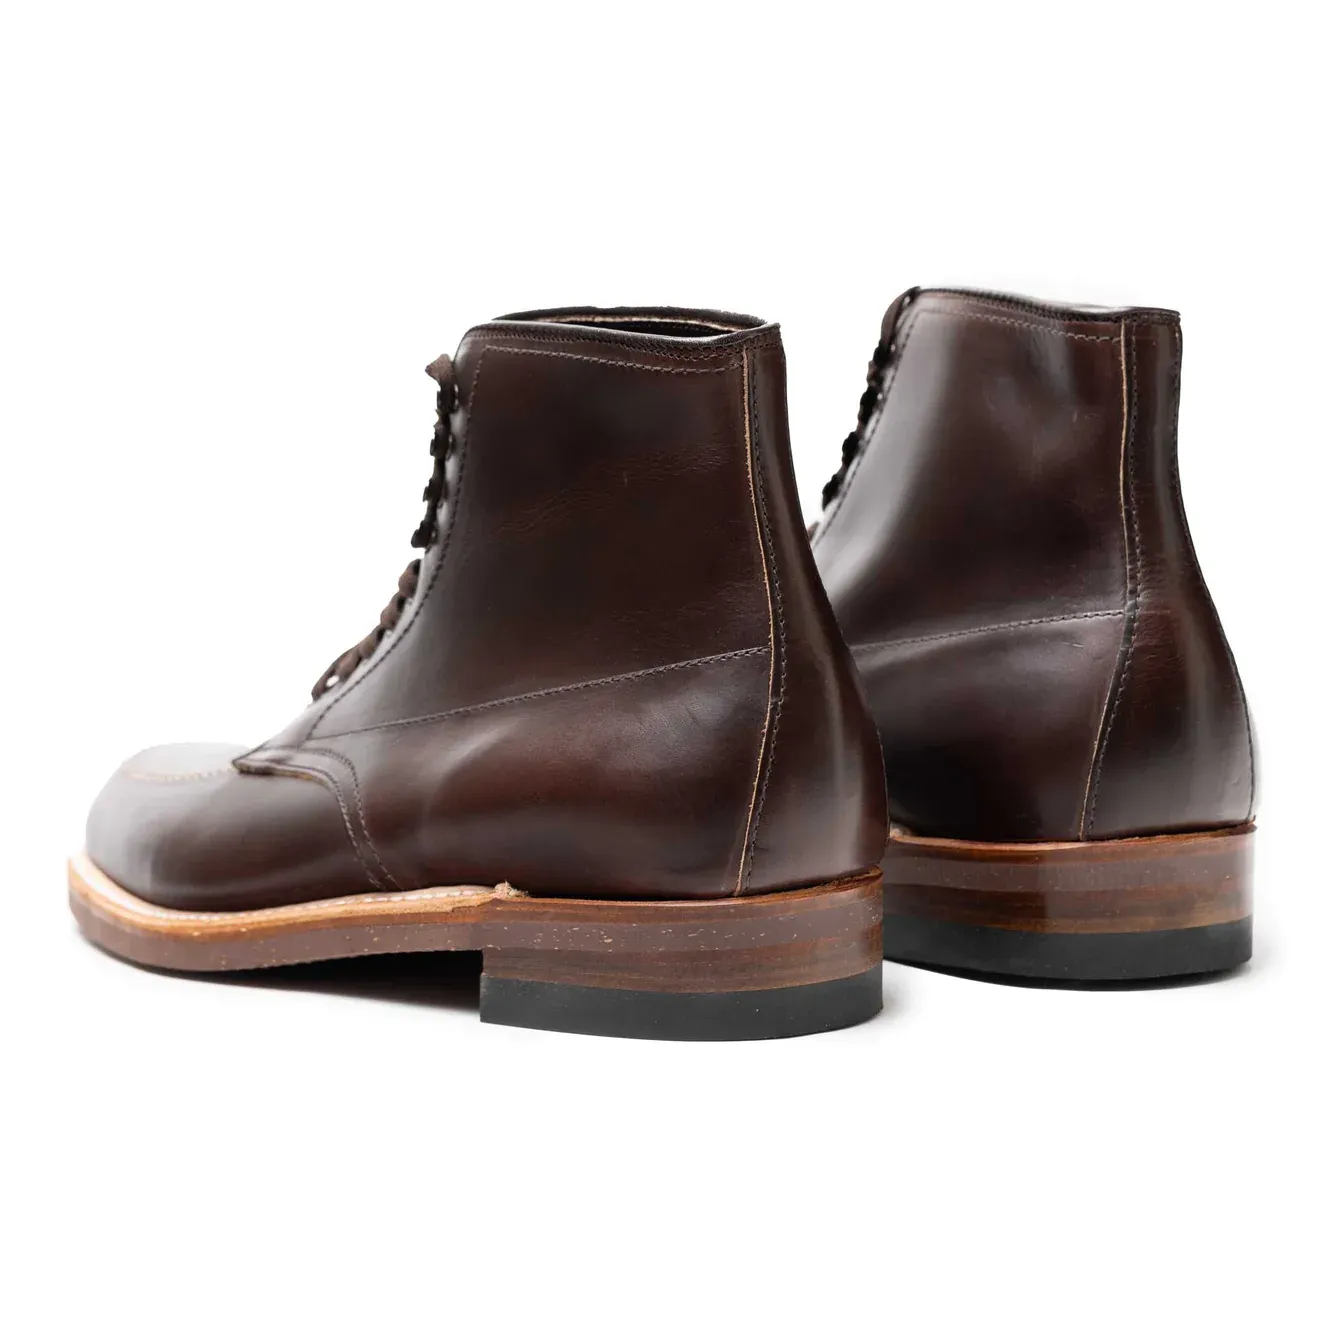 The Alden Indy Boot post image